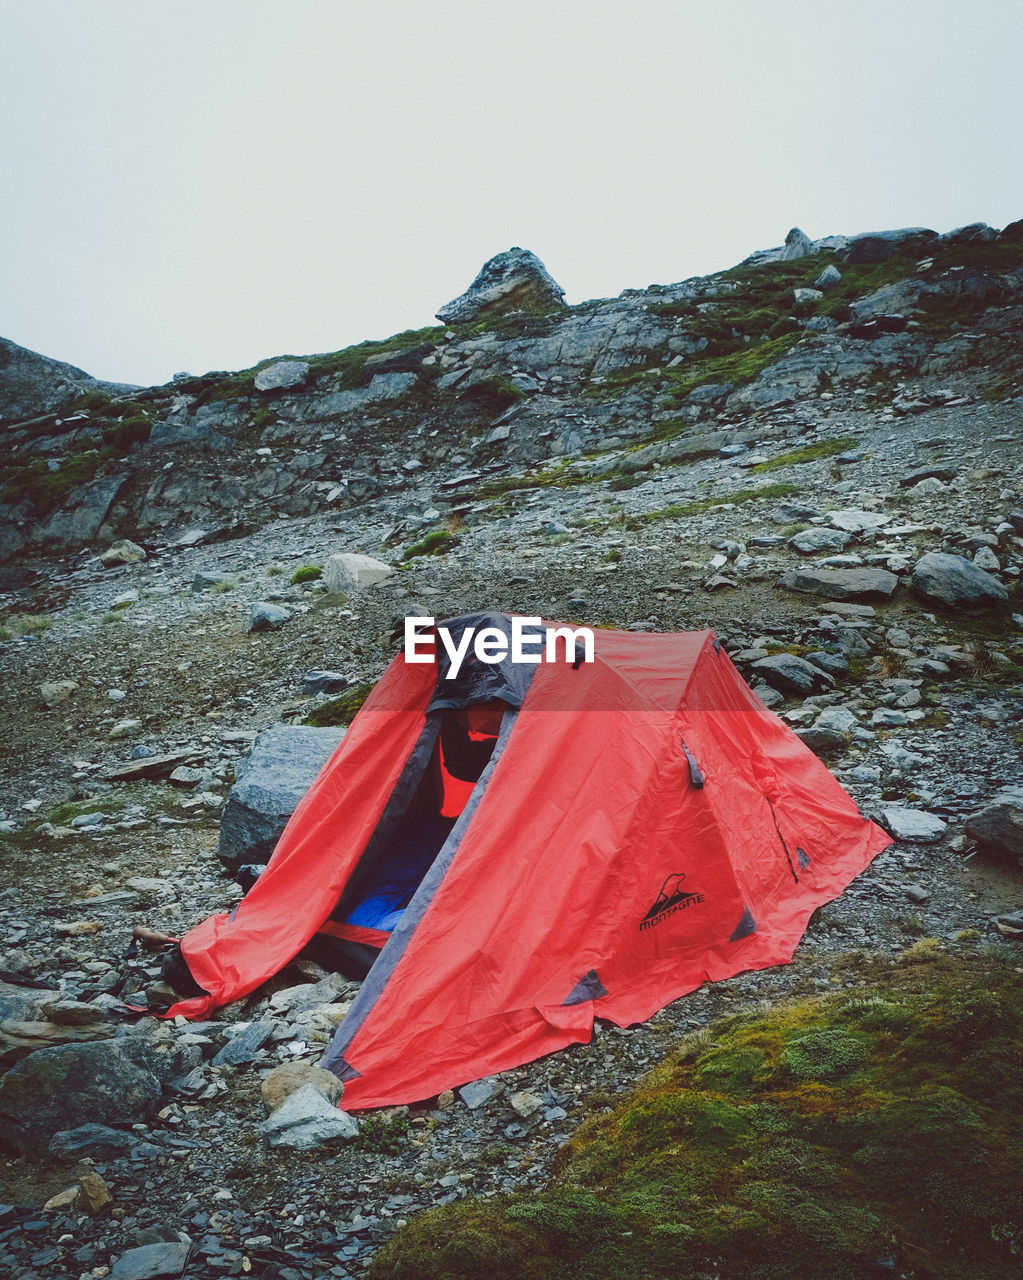 TENT BY ROCK AGAINST SKY